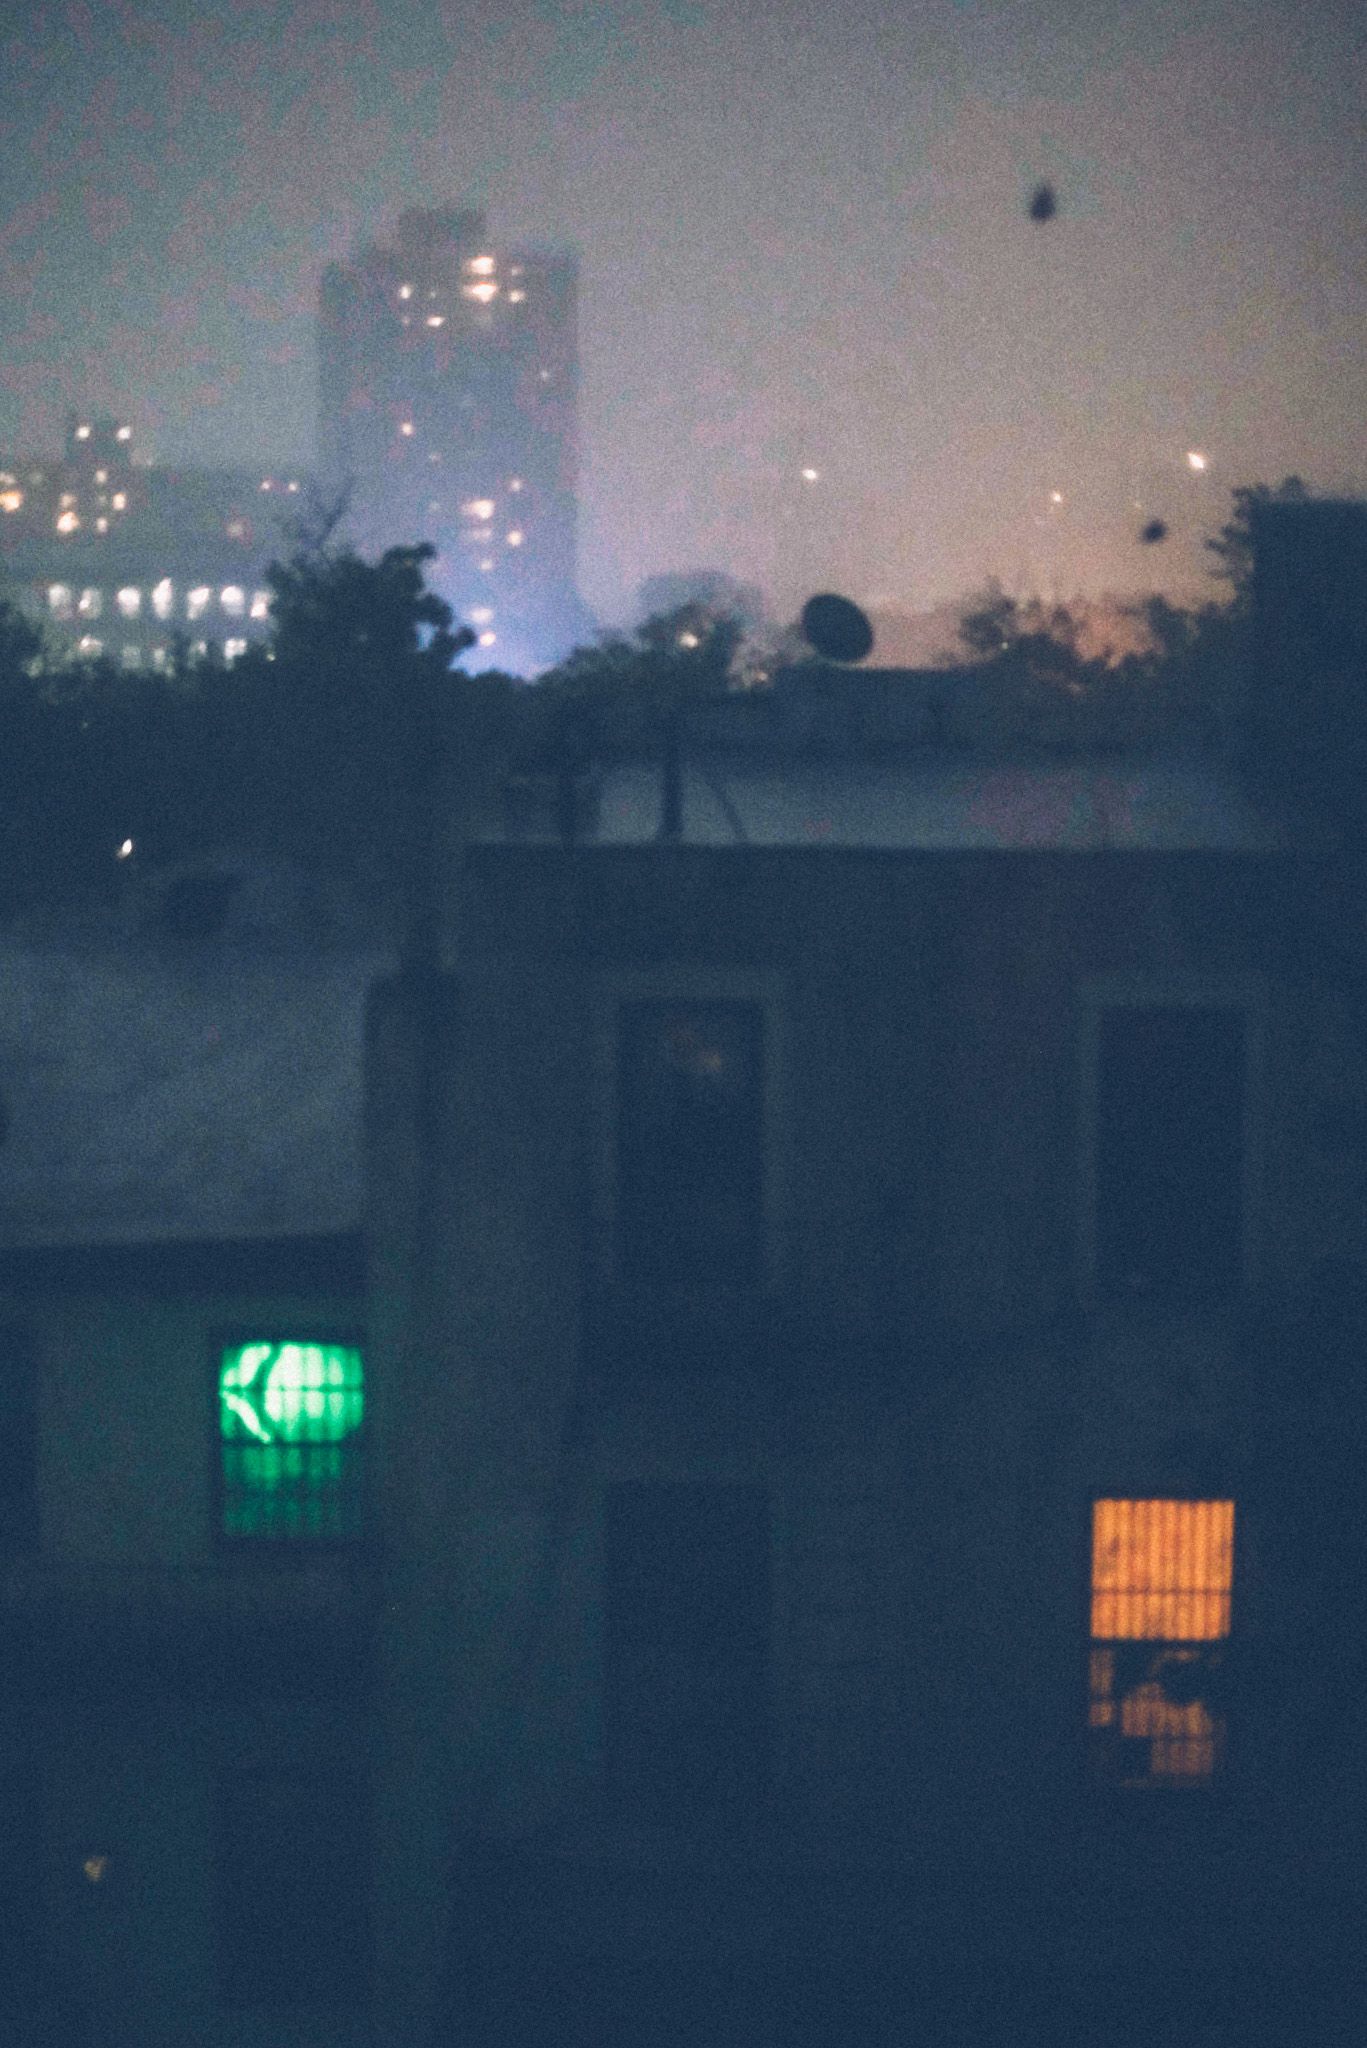 The view from inside an apartment, looking through a window out at a foggy, rainy night, buildings lit in the misty background with two windows glowing in the foreground, green and orange.